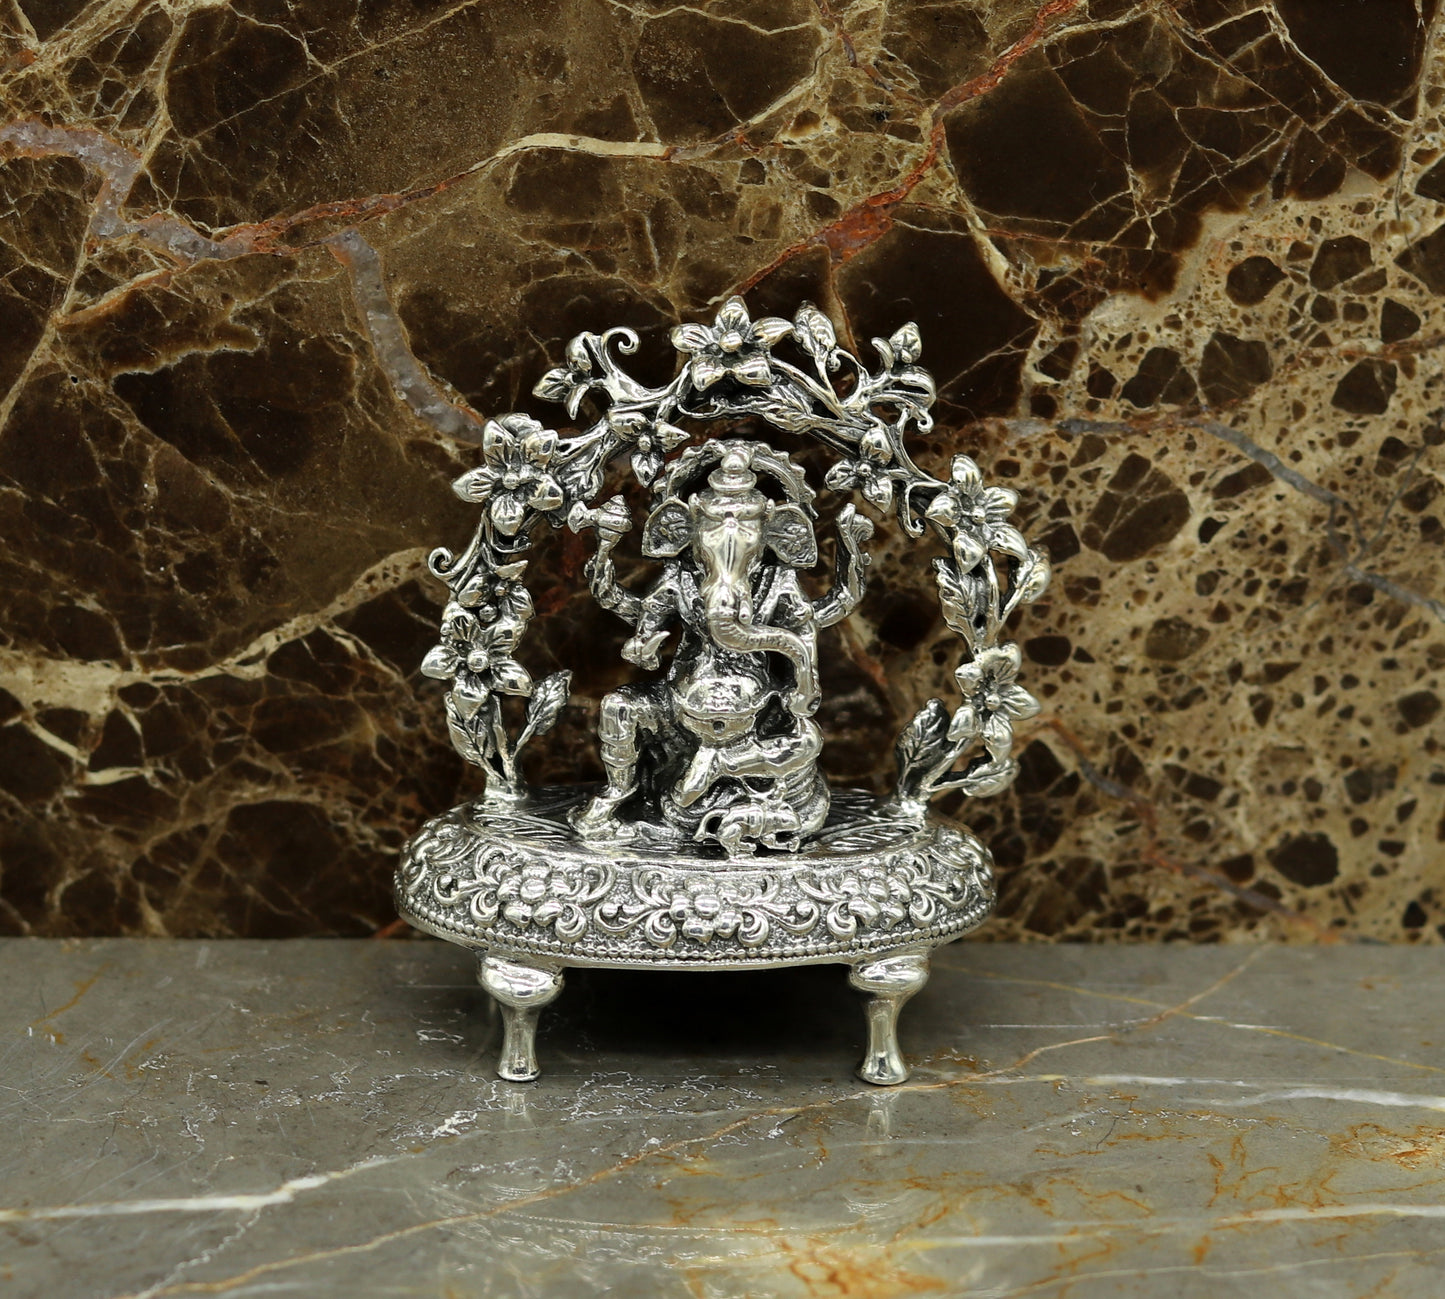 925 Sterling silver Lord Ganesh Idol, Pooja Articles, Indian Silver Idols, handcrafted Lord Ganesh statue sculpture amazing gifting art su03 - TRIBAL ORNAMENTS